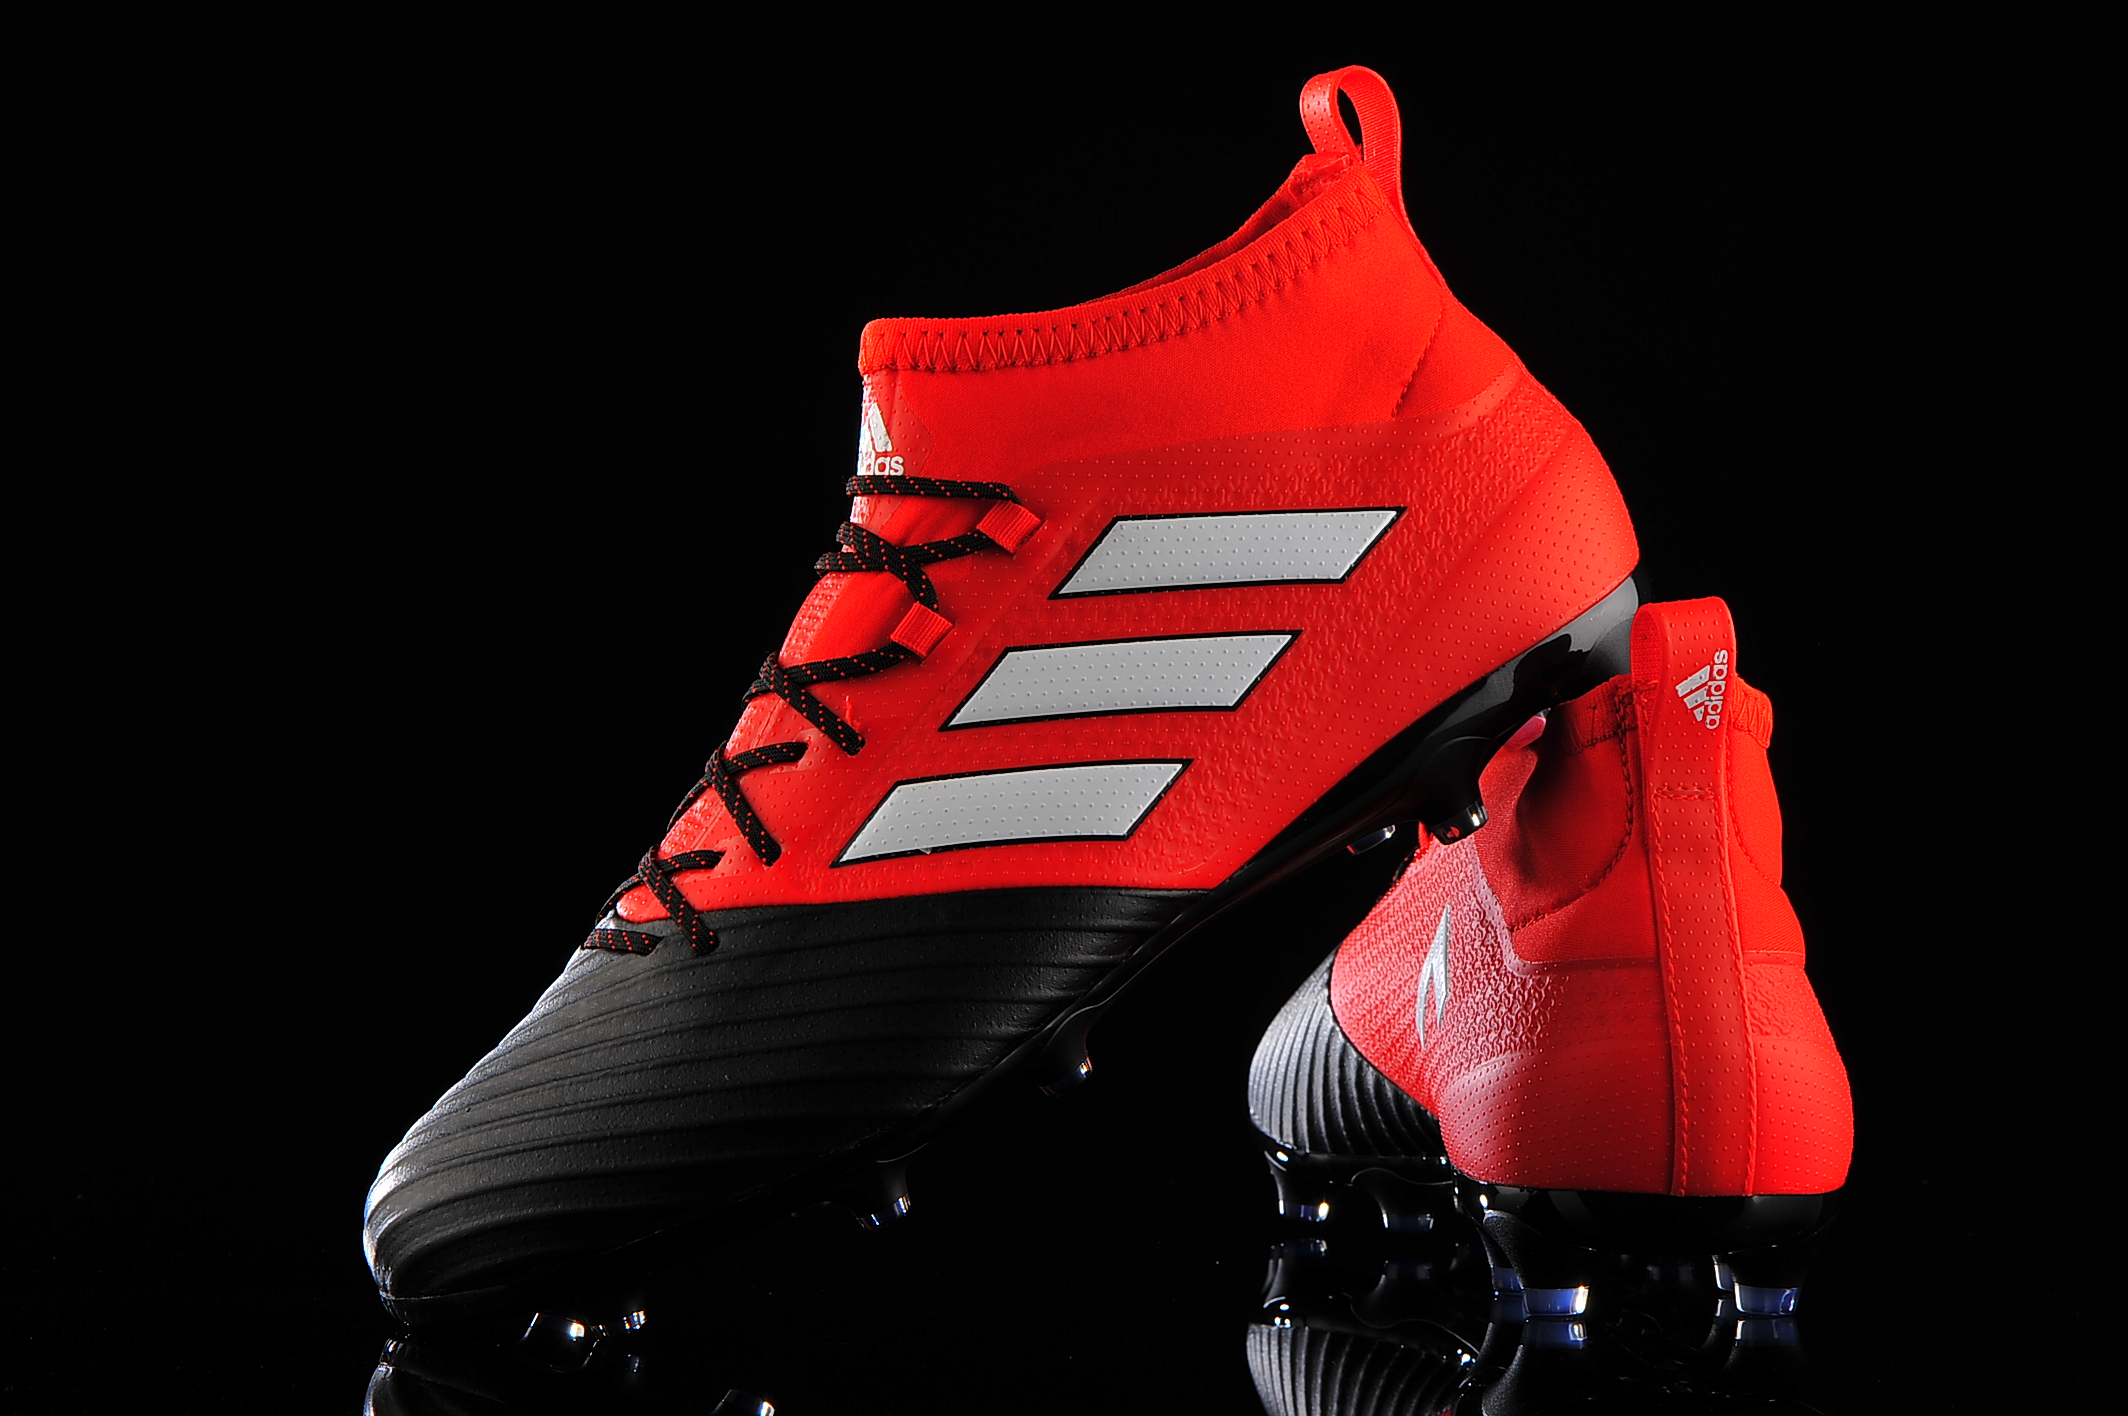 adidas ace 17.2 red